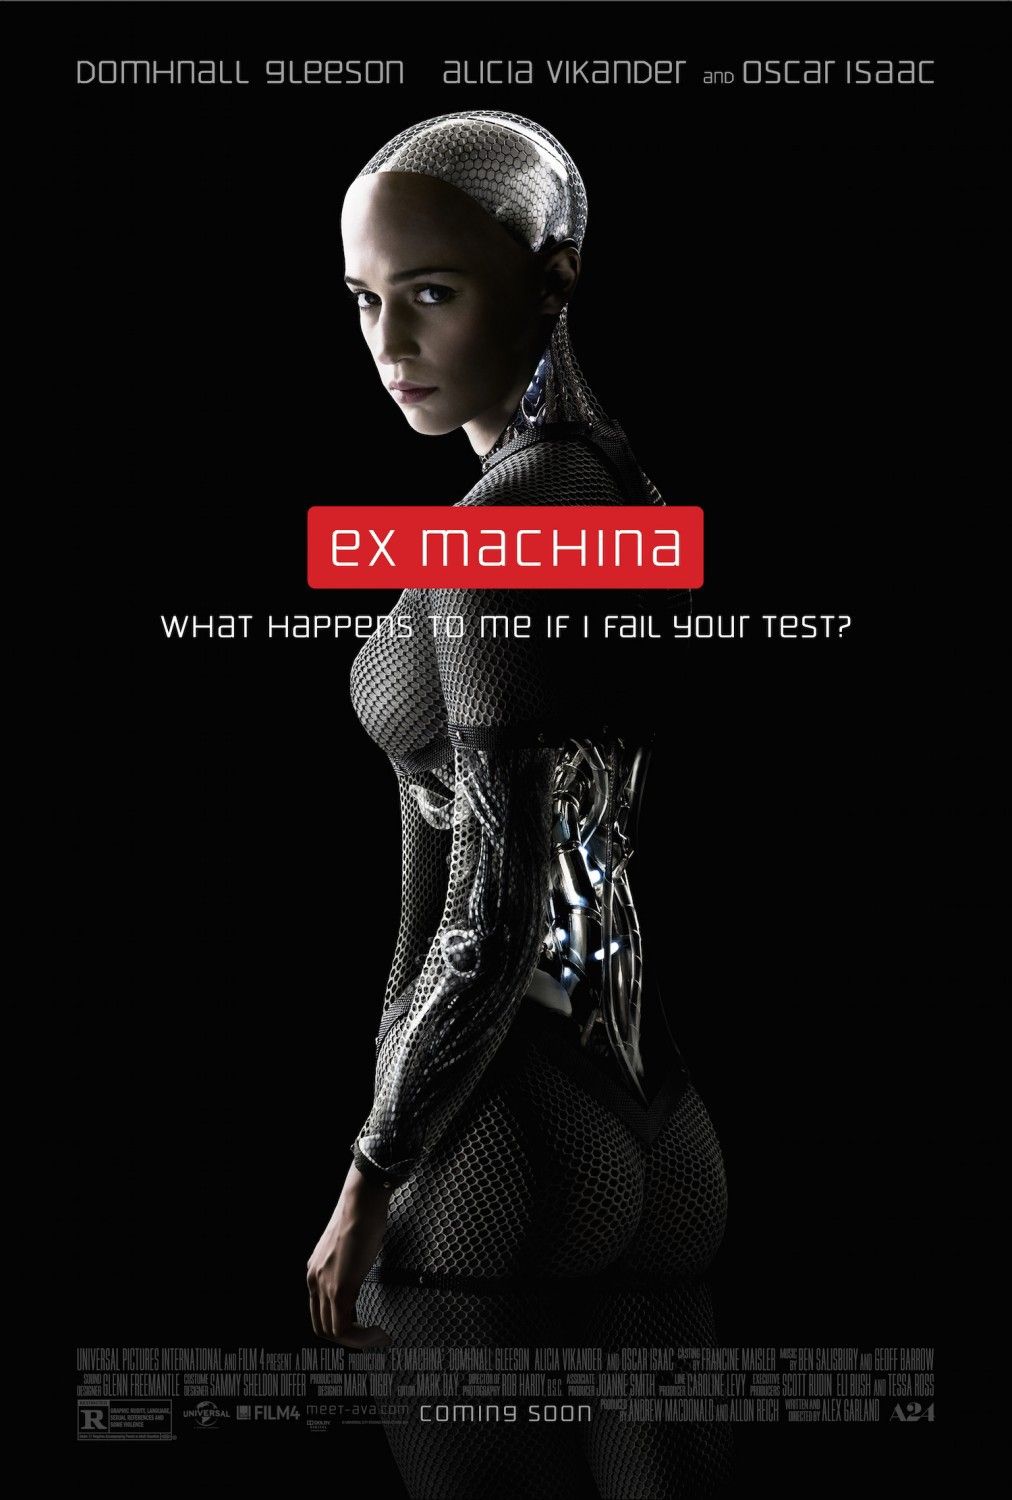 Ex Machina' Ending Explained - What Is Happening to Ava?